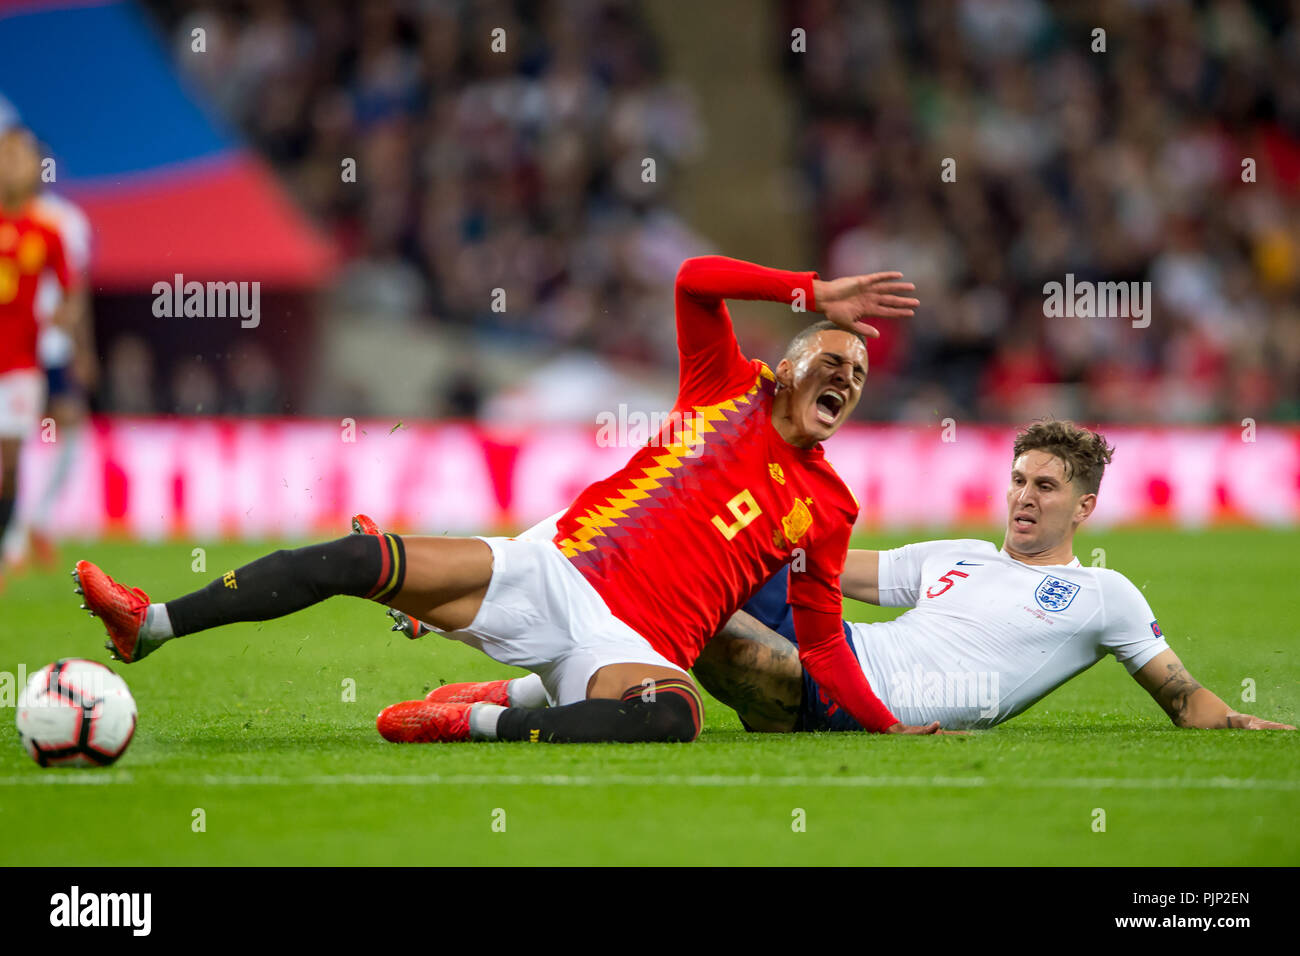 Rodrigo Moreno of Spain is fouled by John Stones of England during the UEFA Nation League, Group 4, League A match between England and Spain at Wembley Stadium, London, England on 8 September 2018. 8th Sep, 2018. Photo by Salvio Calabrese Credit: AFP7/ZUMA Wire/Alamy Live News Stock Photo